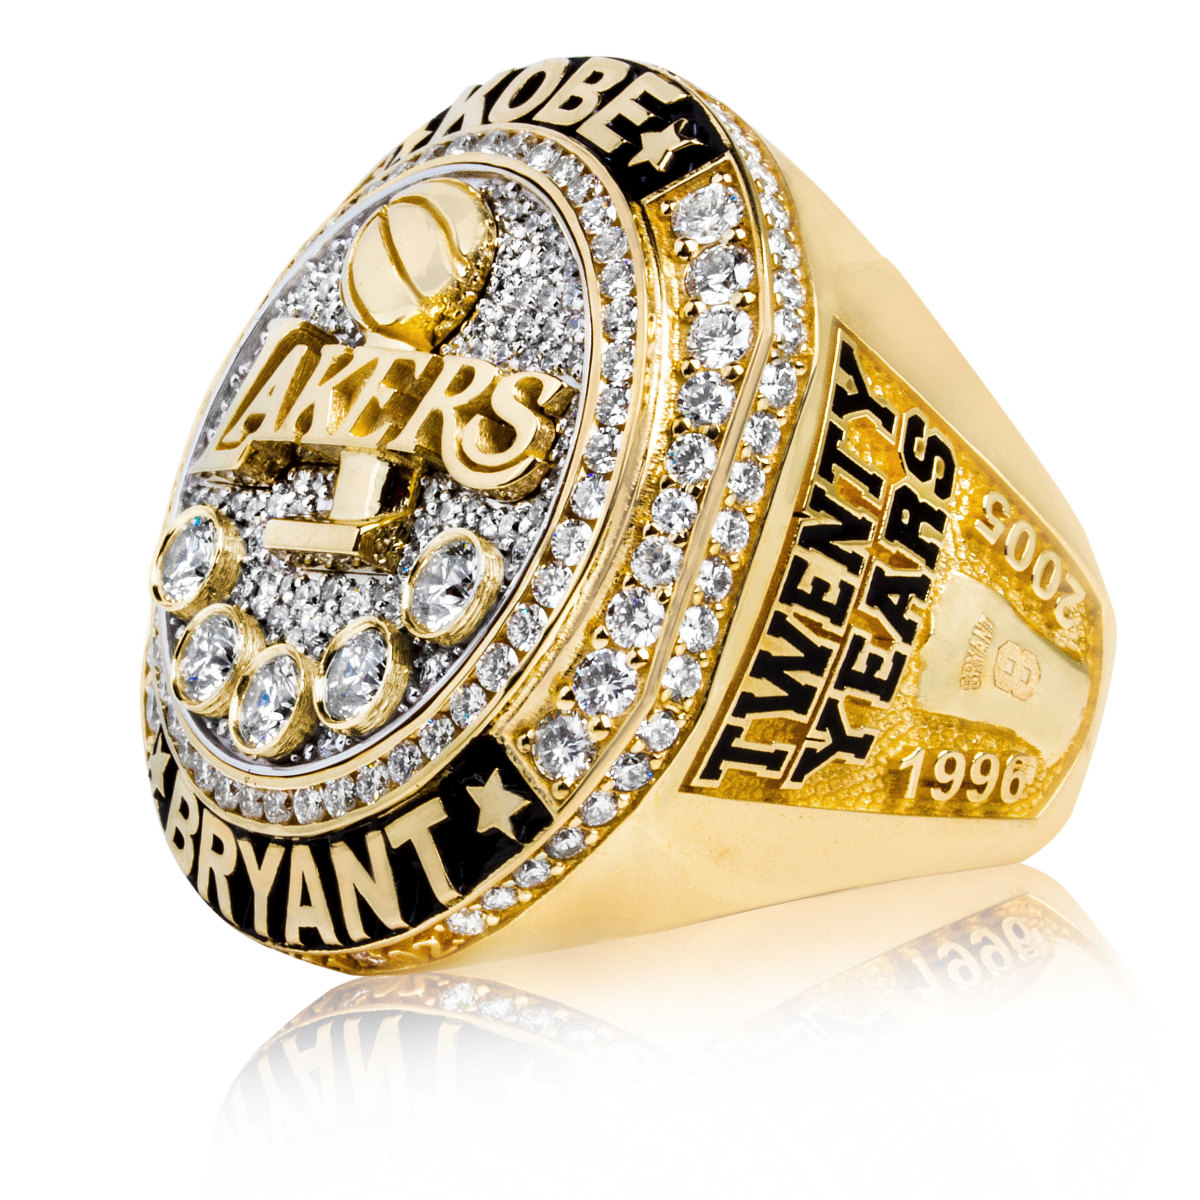 Sold at Auction: Unsigned, KOBE BRYANT Framed Championship Ring